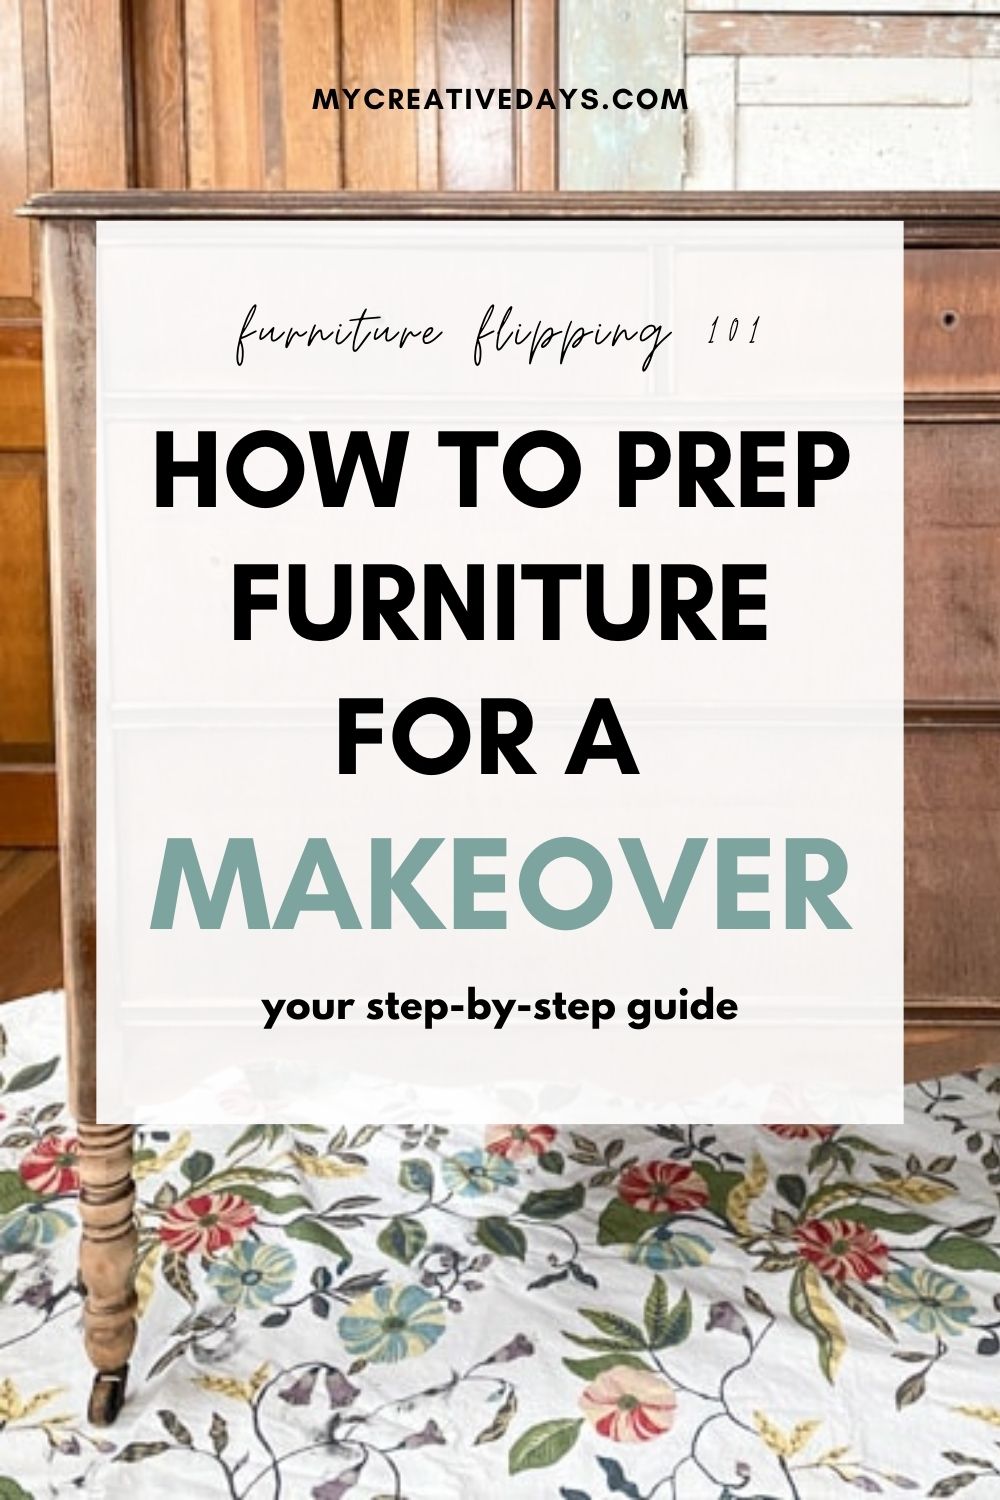 How To Prep Furniture For A Makeover